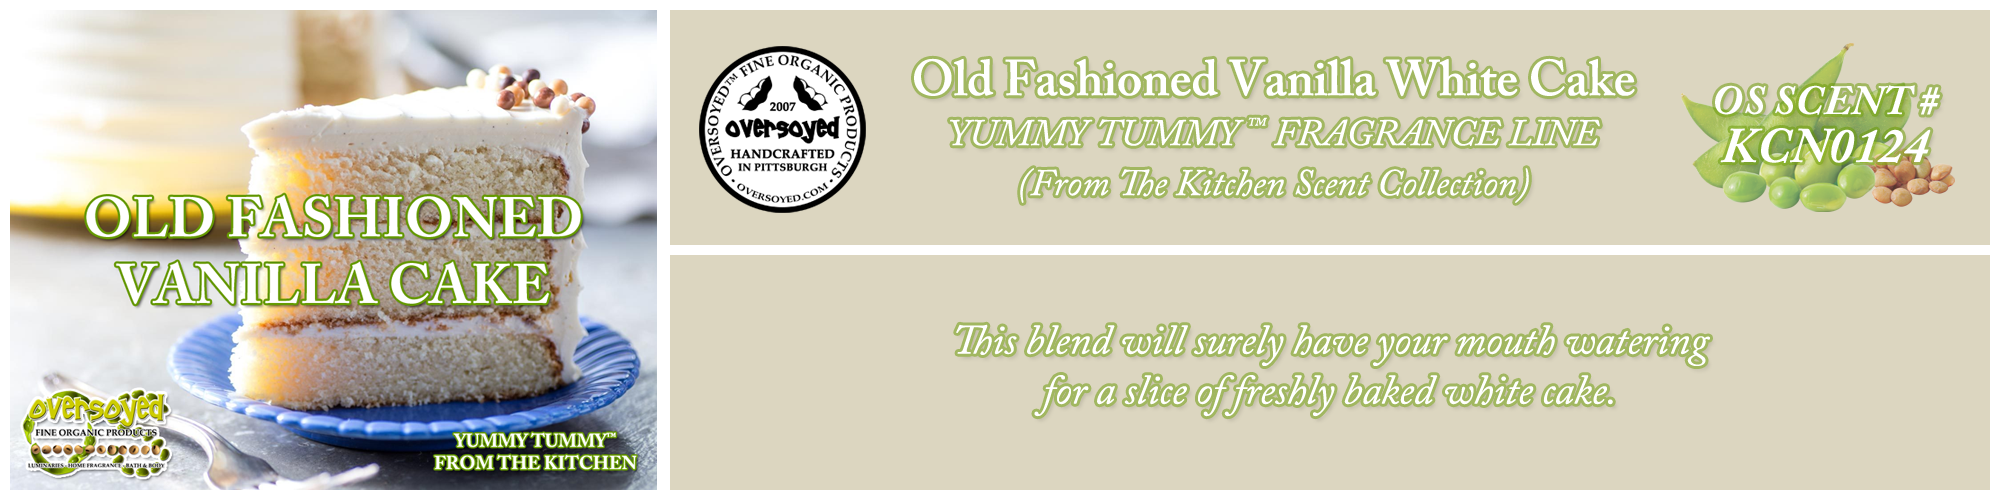 Old Fashioned Vanilla White Cake Handcrafted Products Collection